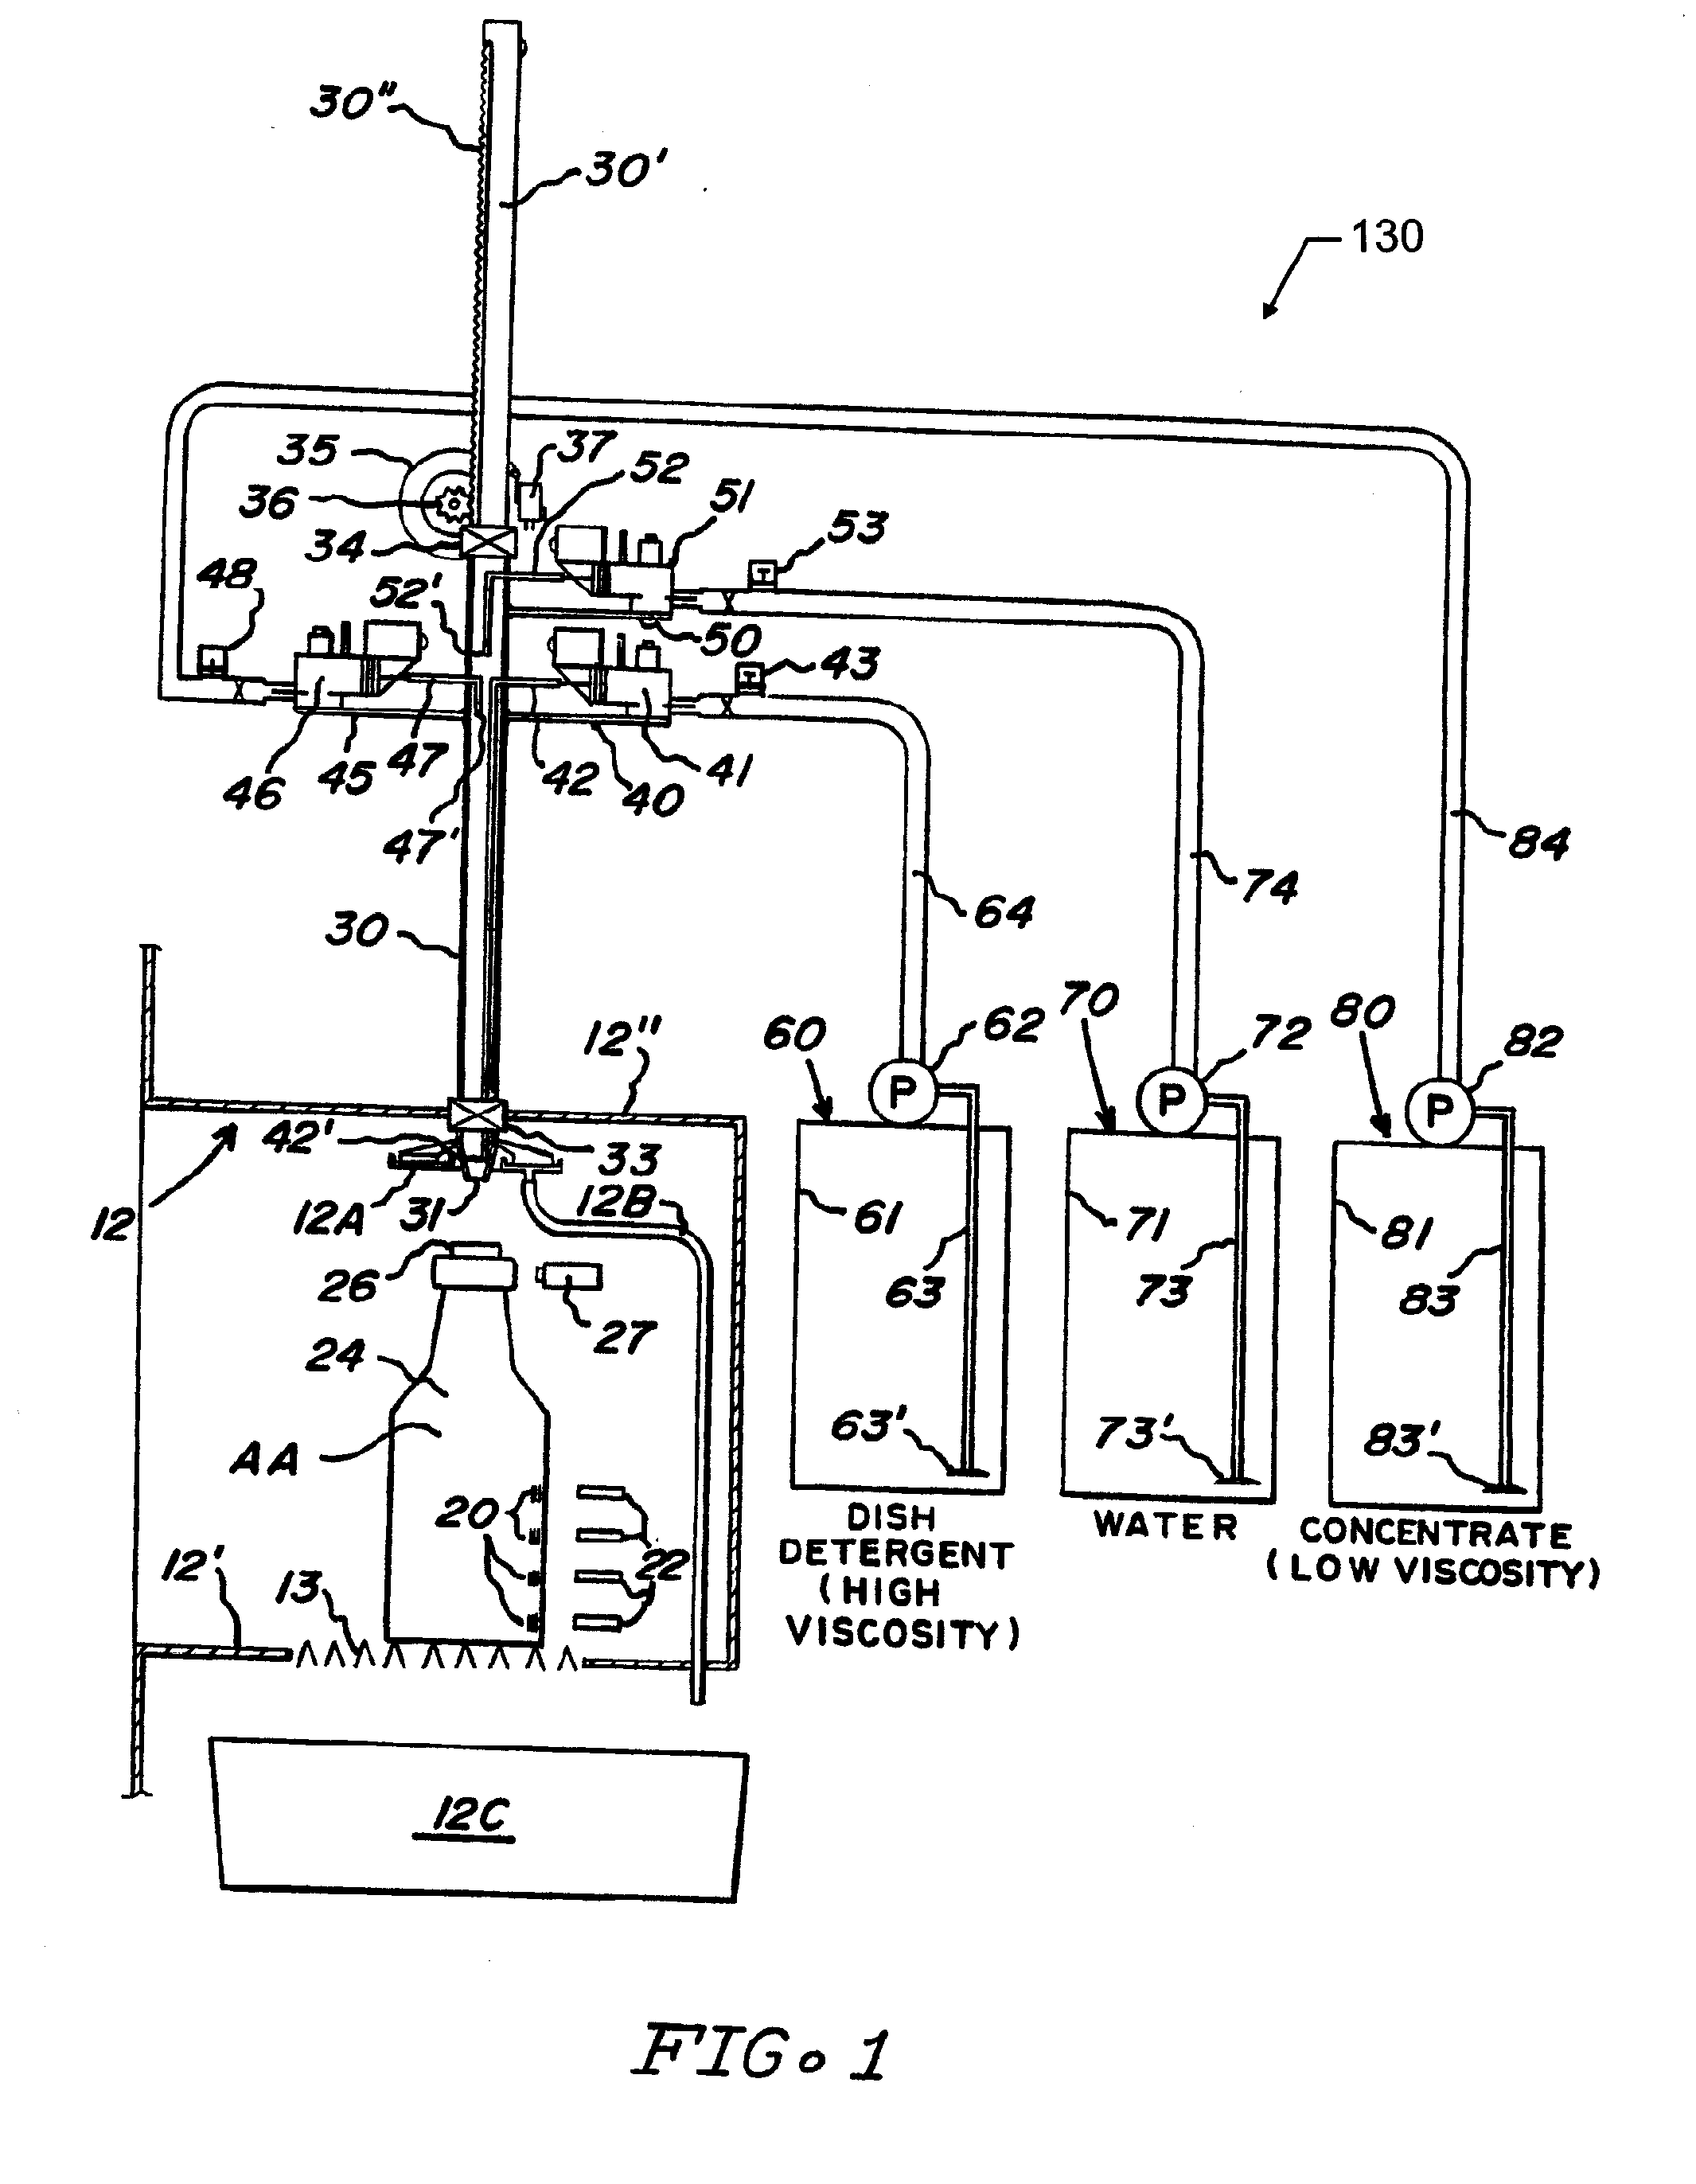 Method and Apparatus for Vending a Containerized Liquid Product Utilizing an Automatic Self-Service Refill System